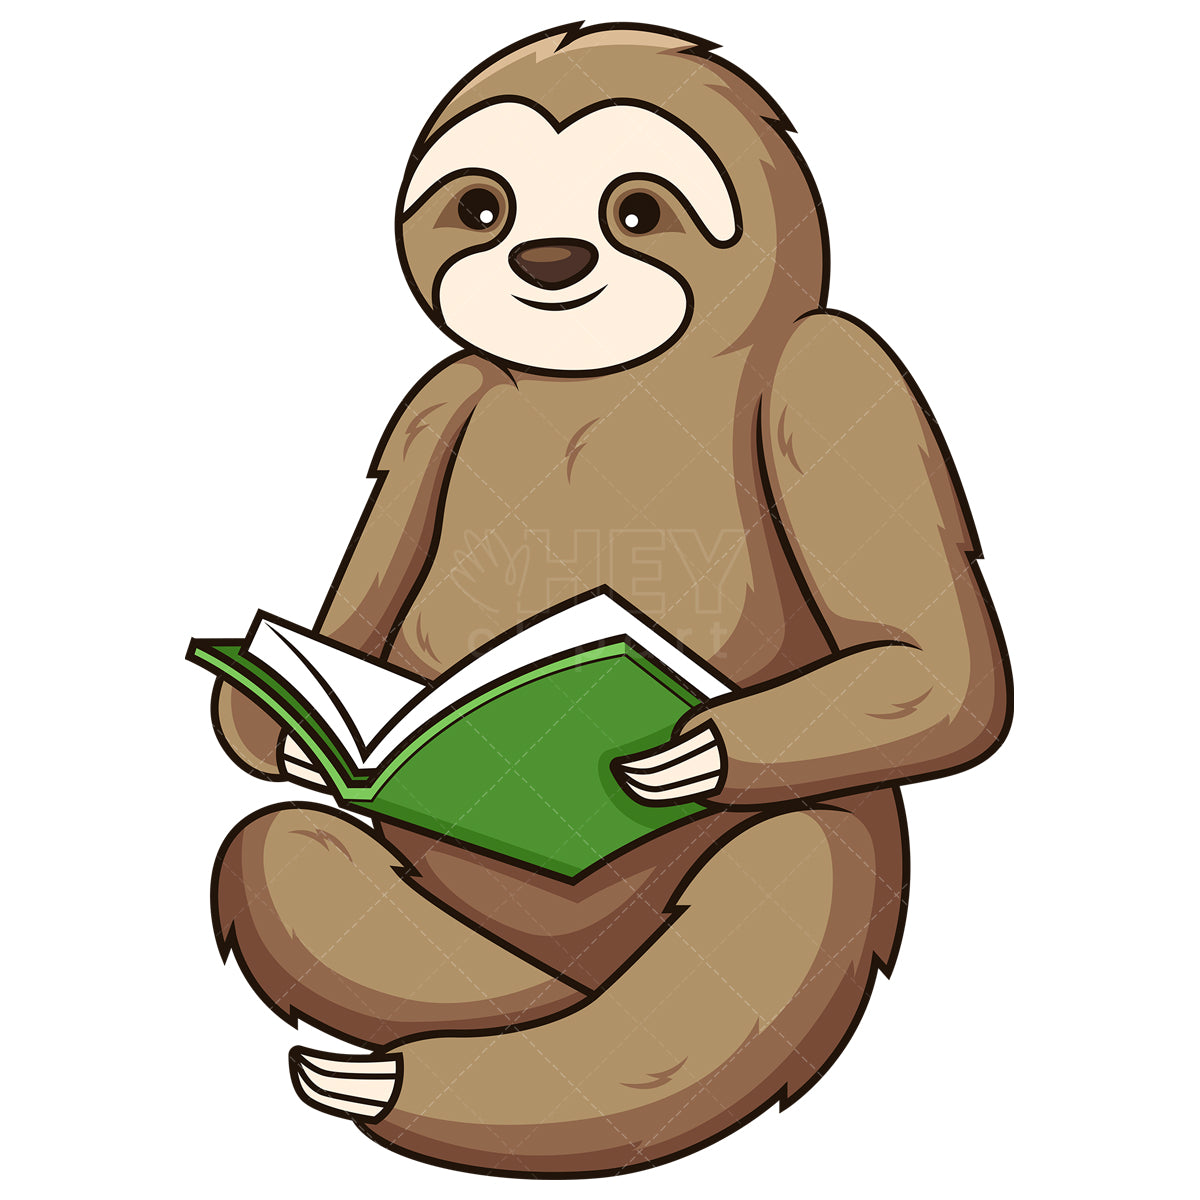 Royalty-free stock vector illustration of a sloth reading a book.